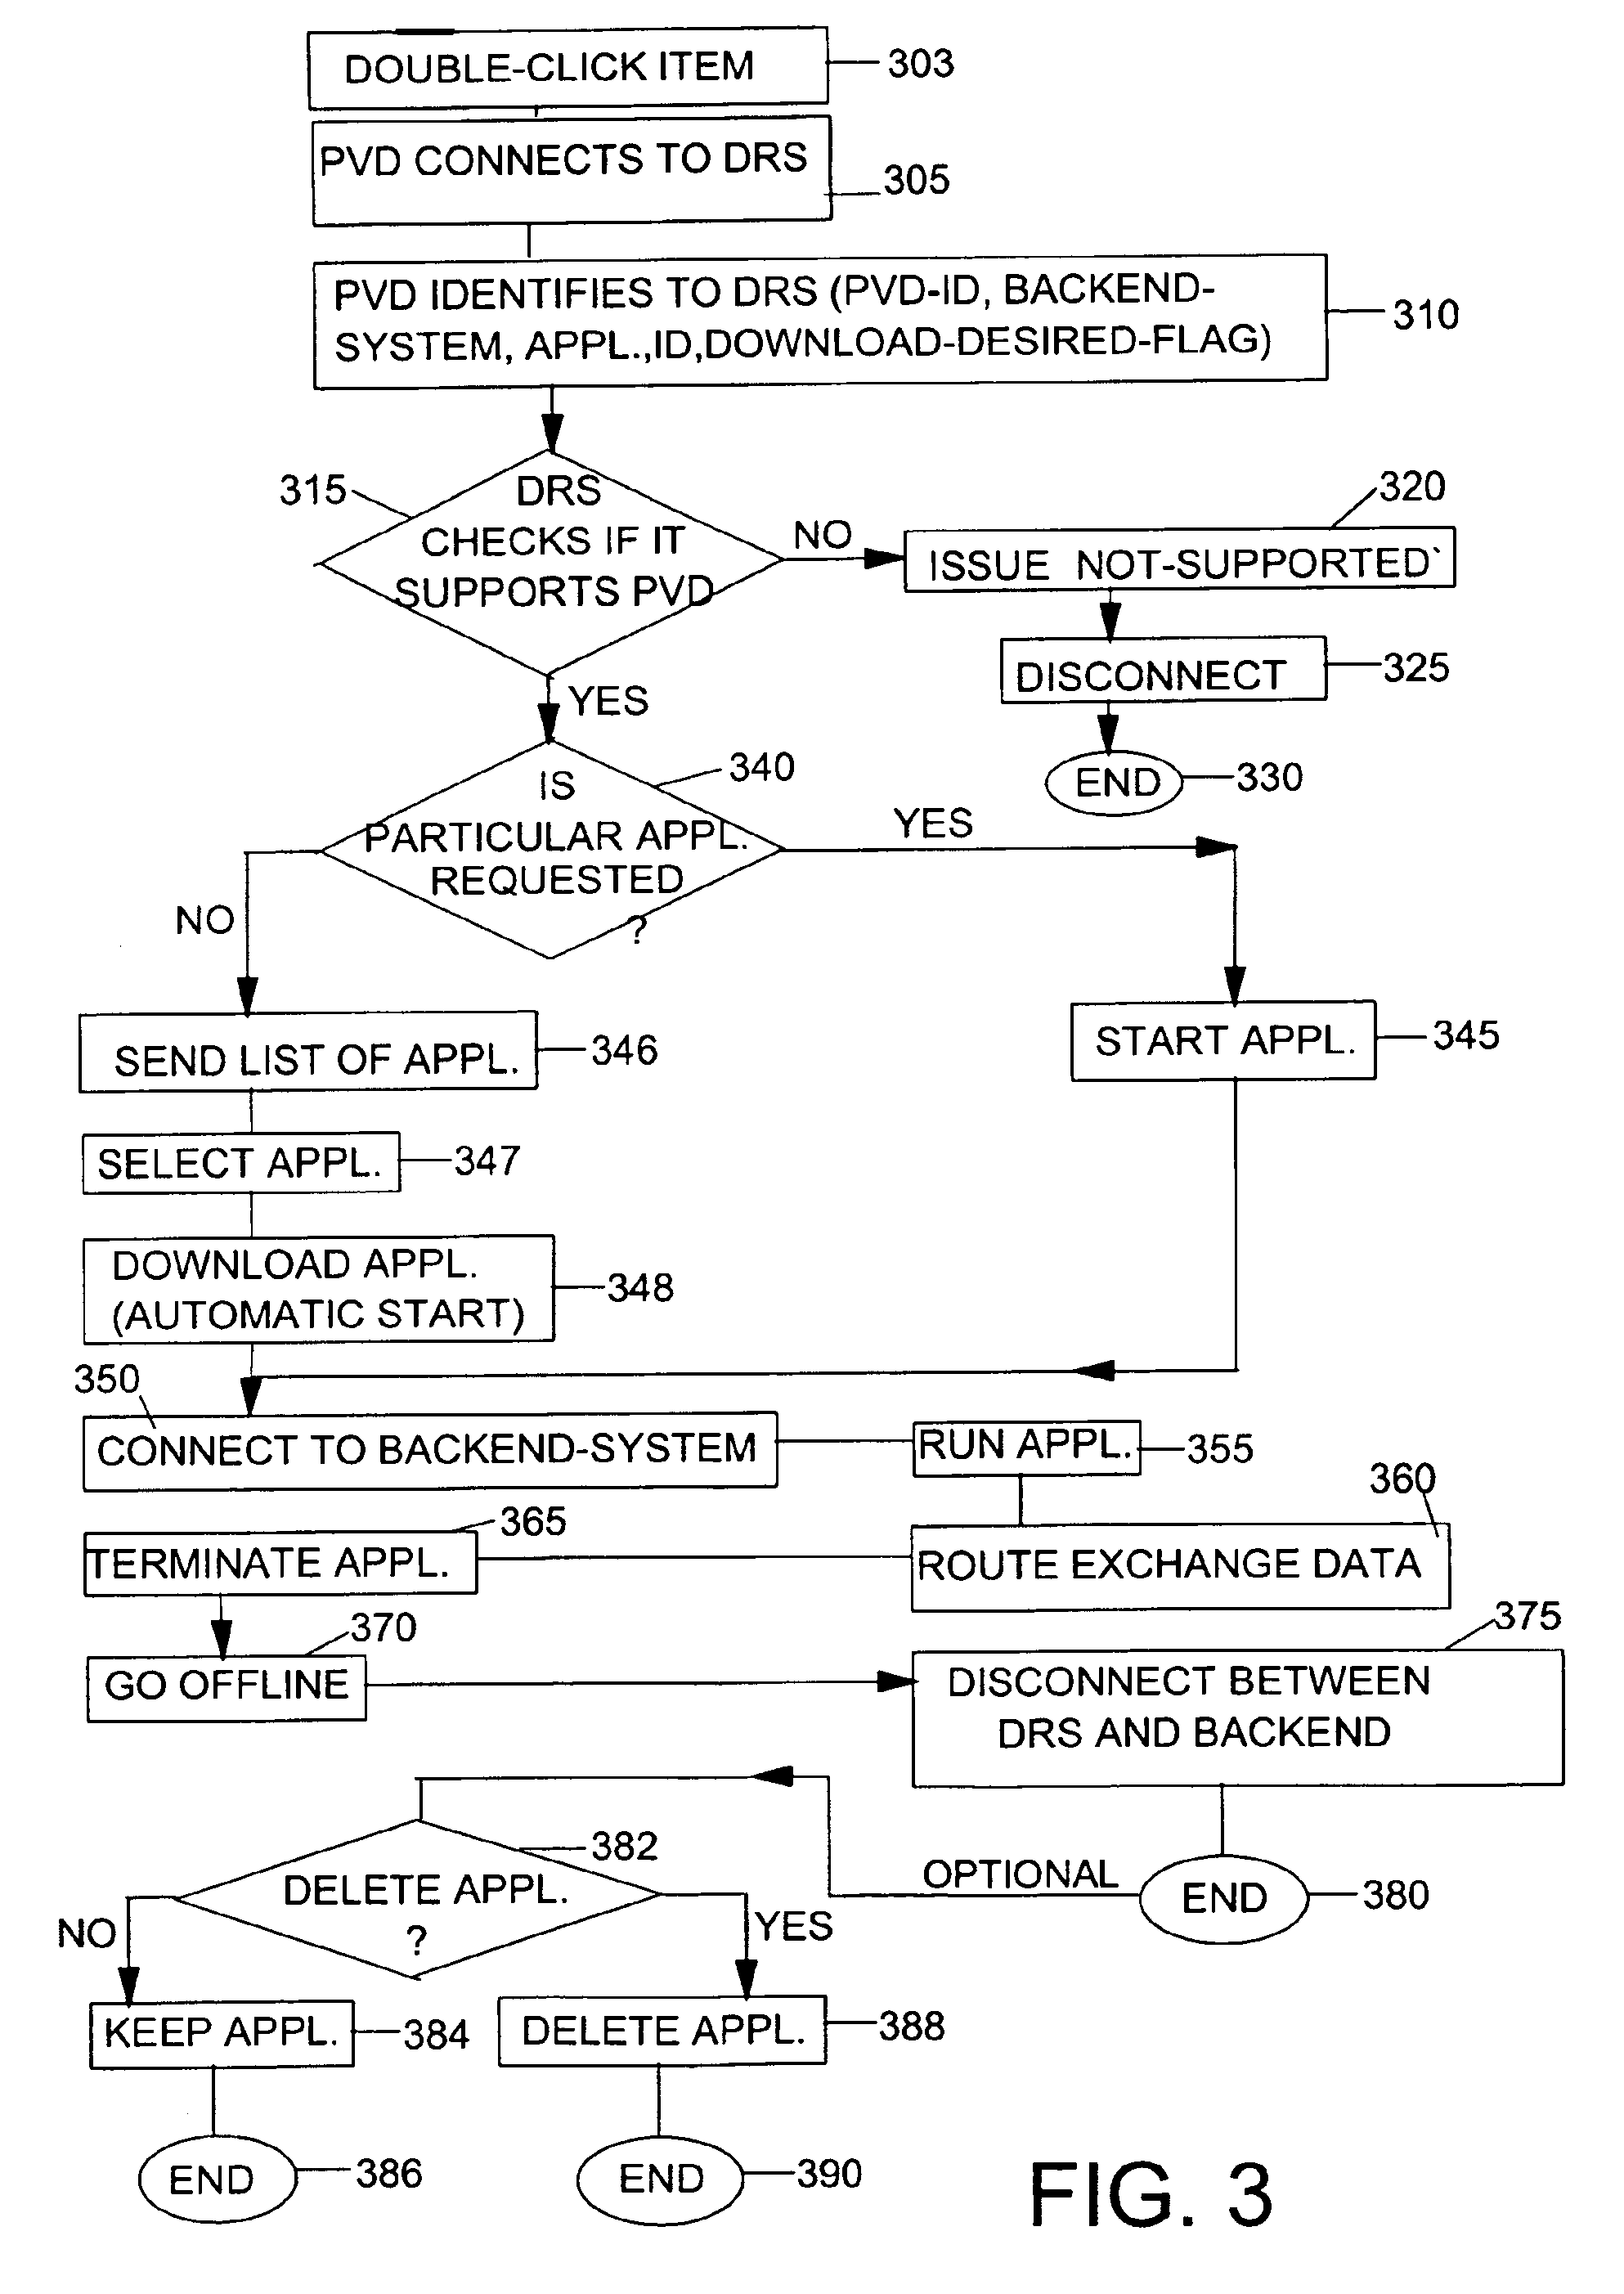 Device registry for automatic connection and data exchange between pervasive devices and backend systems